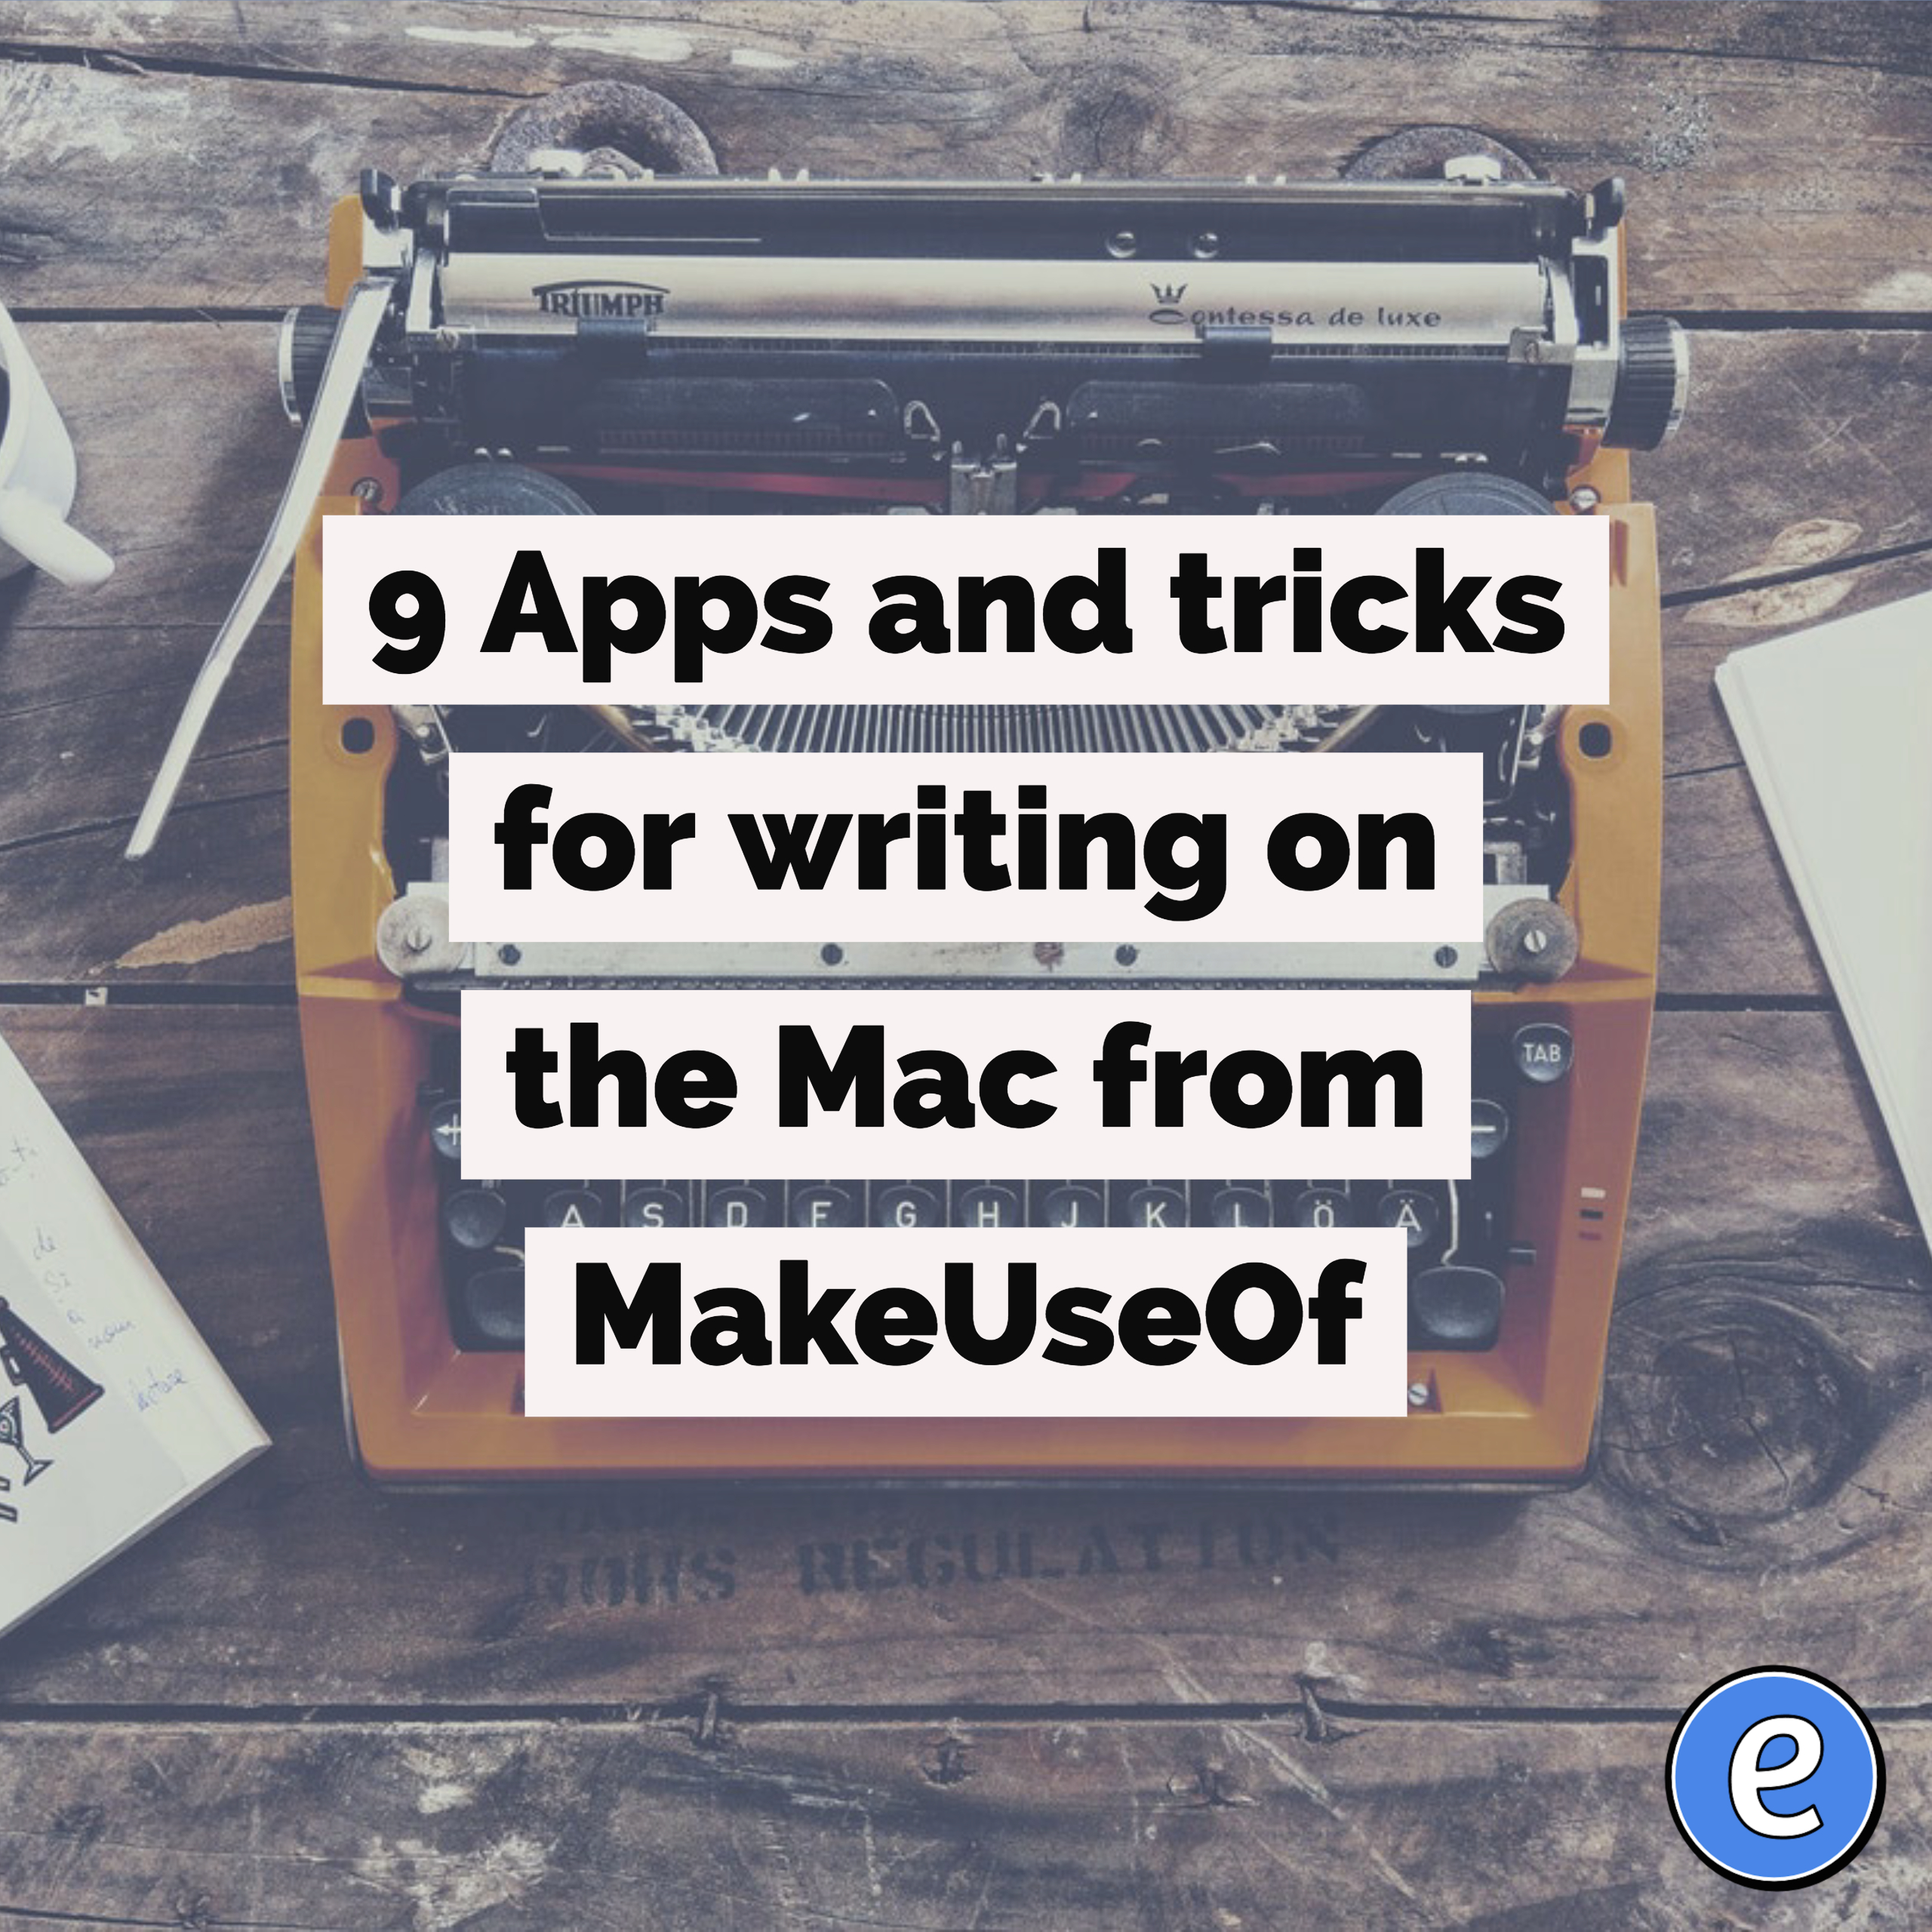 9 Apps and tricks for writing on the Mac from MakeUseOf